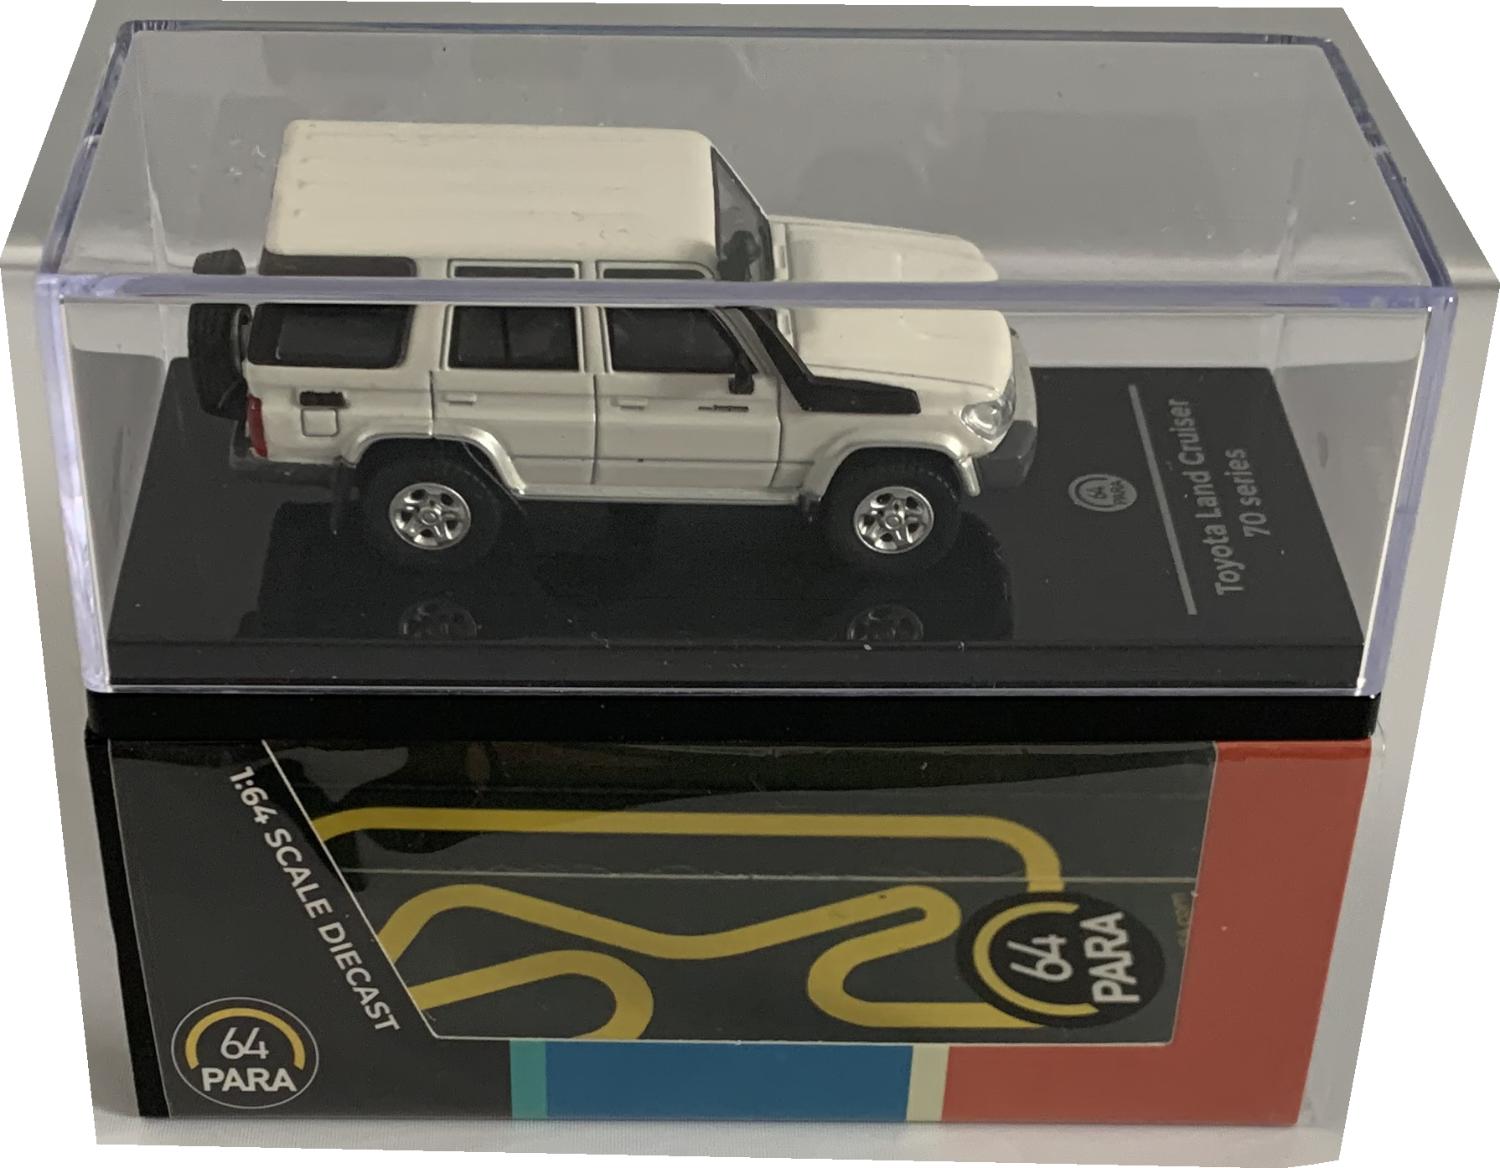 A good reproduction of the Toyota Land Cruiser mounted on a removable plinth and a removable hard plastic cover